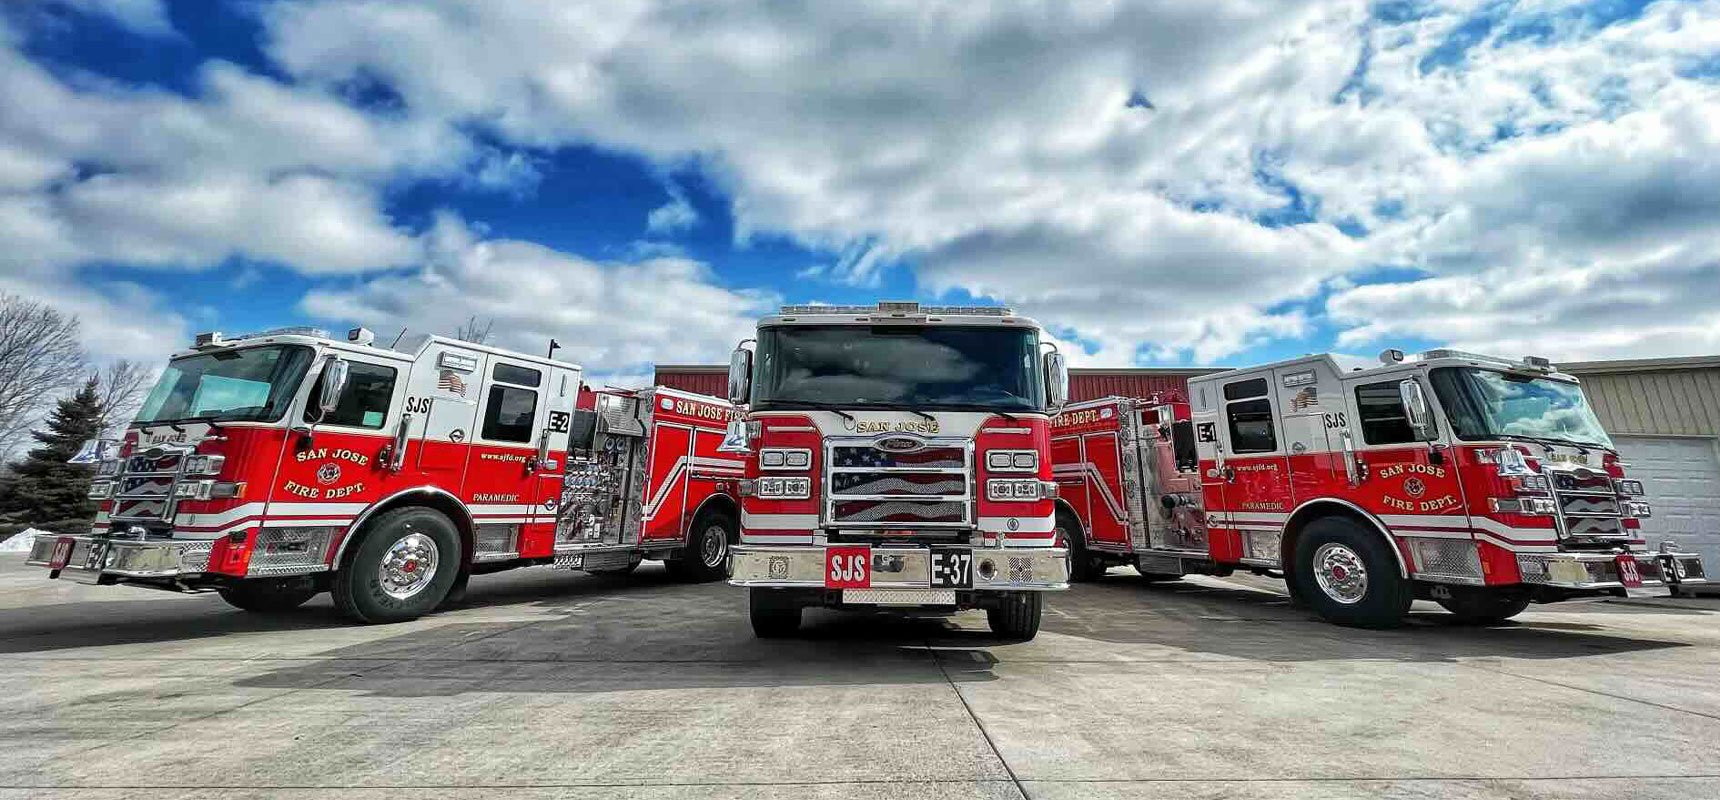 Three pumper fire apparatus are parked outside of a warehouse facility featuring a bright blue sky scattered with white puffy clouds.